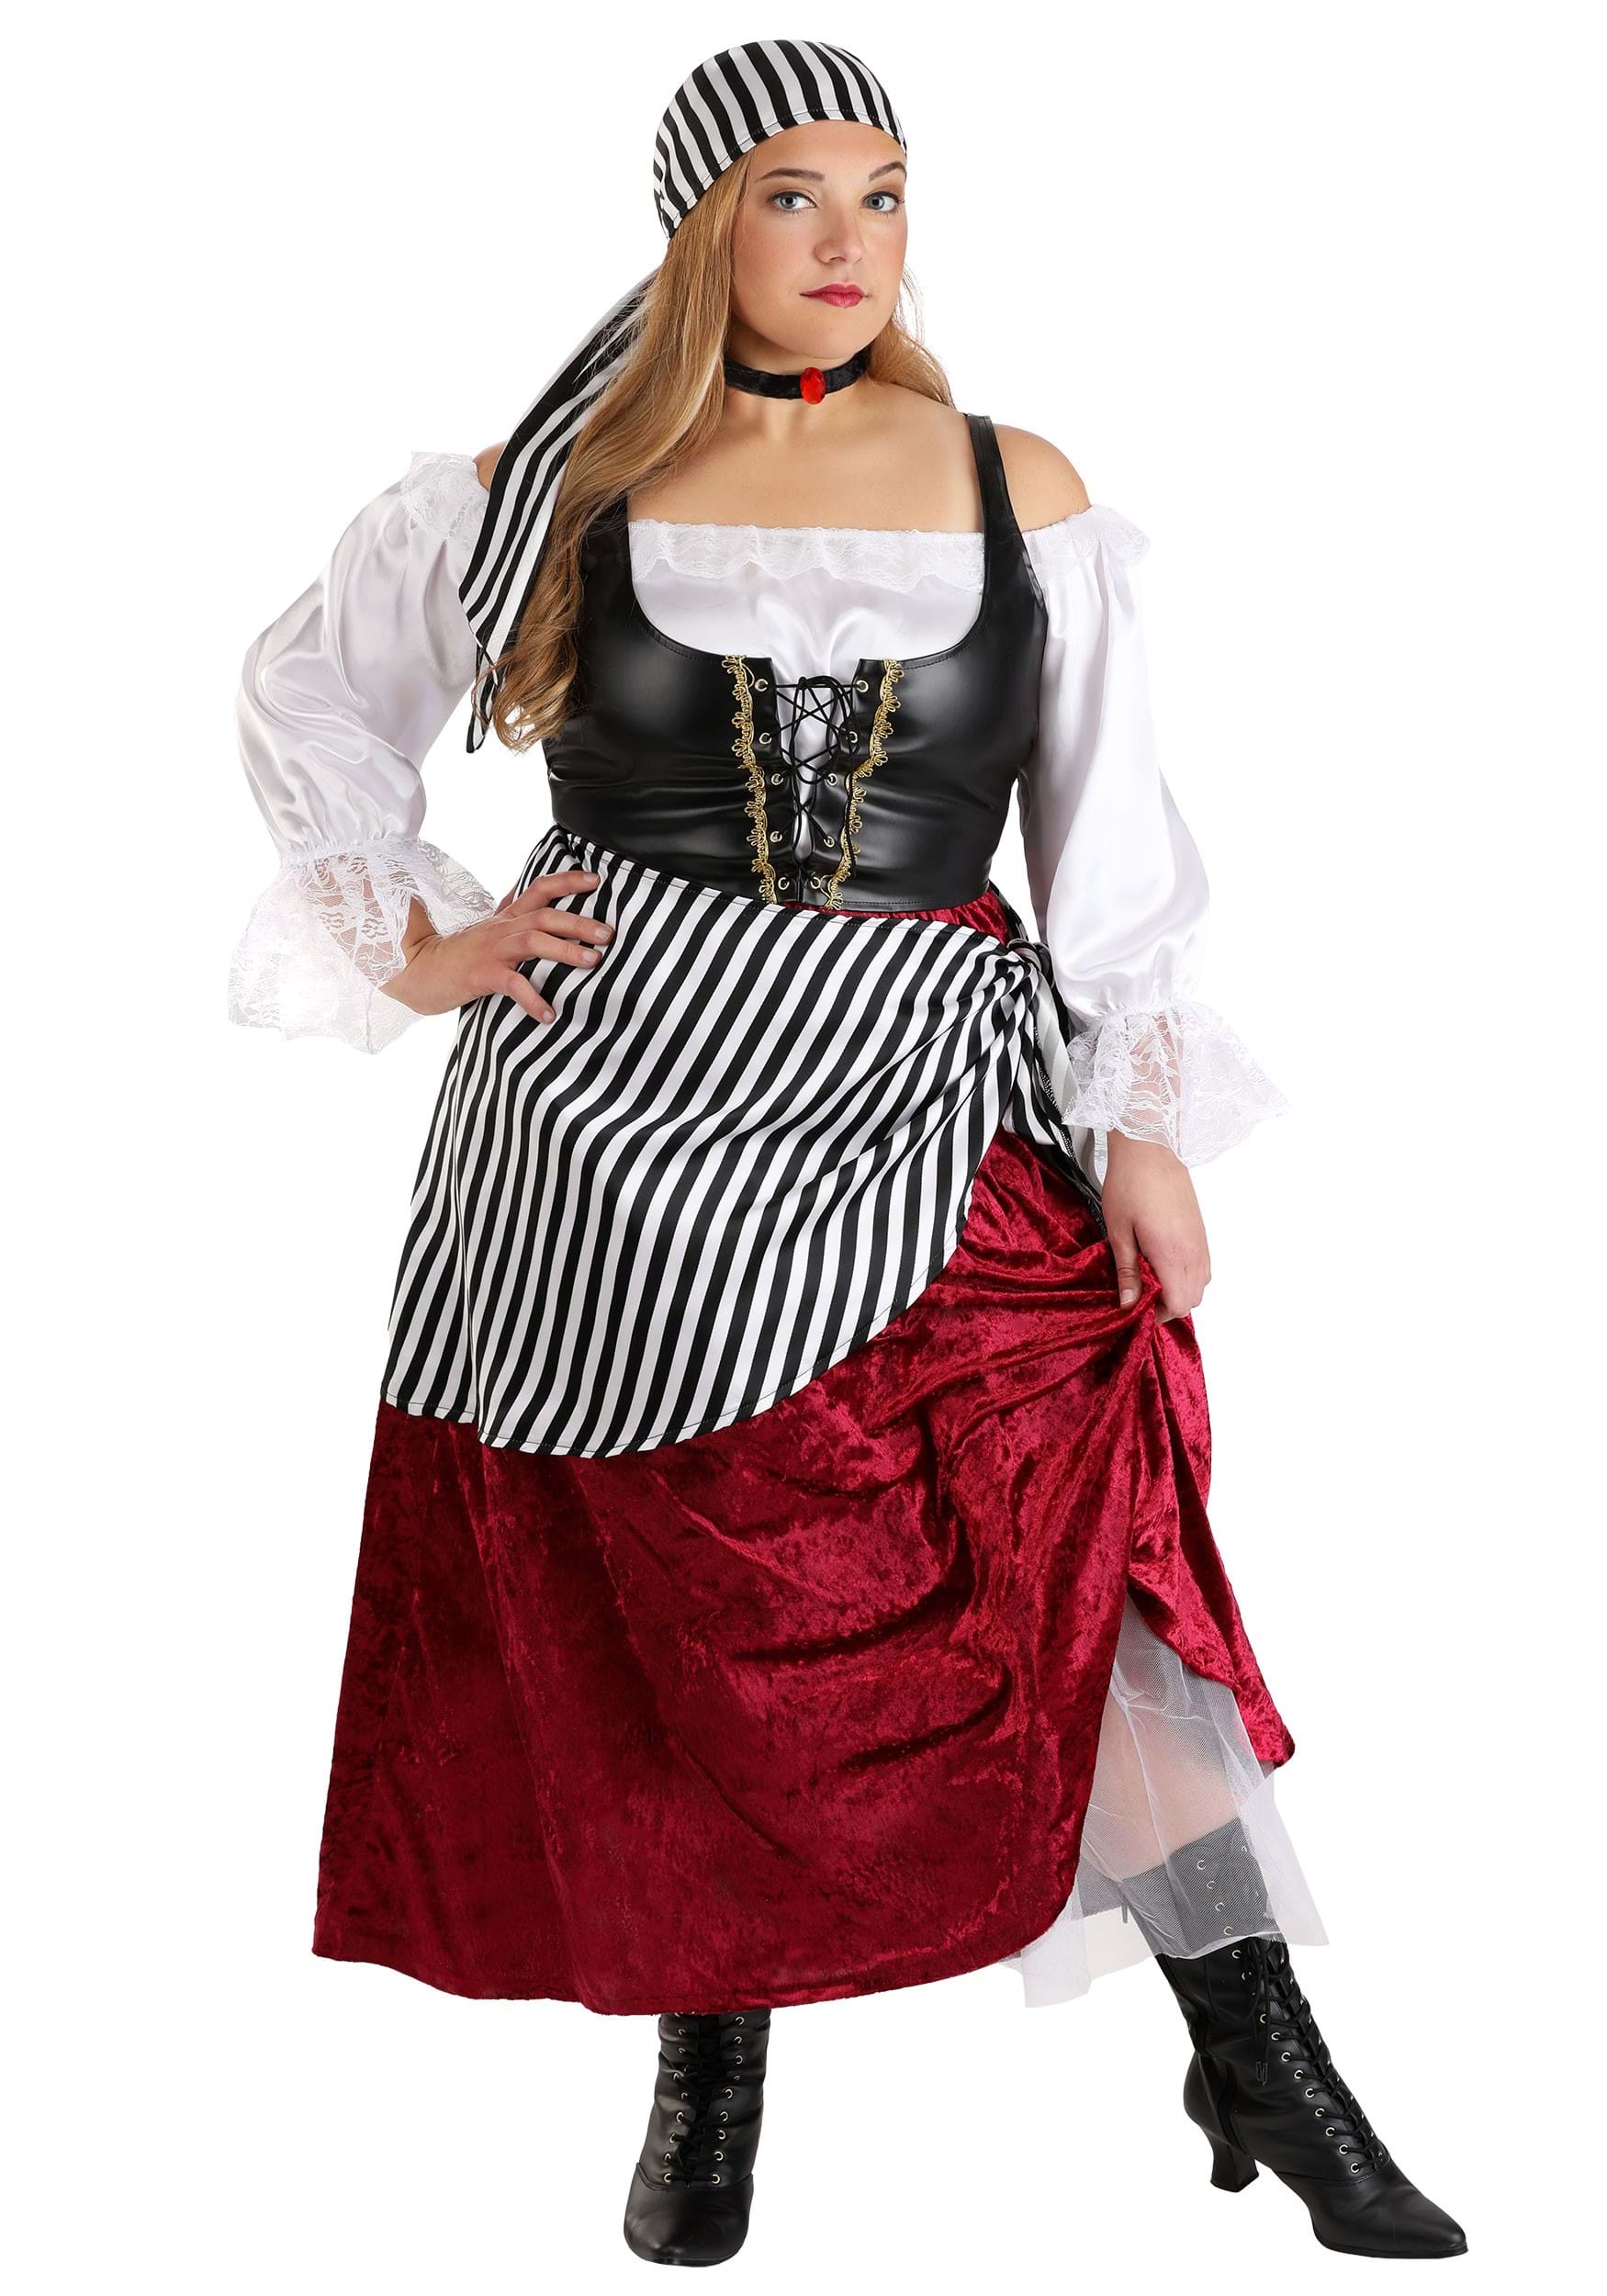 Image of Deluxe Pirate Wench Costume | Exclusive | Sea Maiden Costume ID FUN2062AD-M